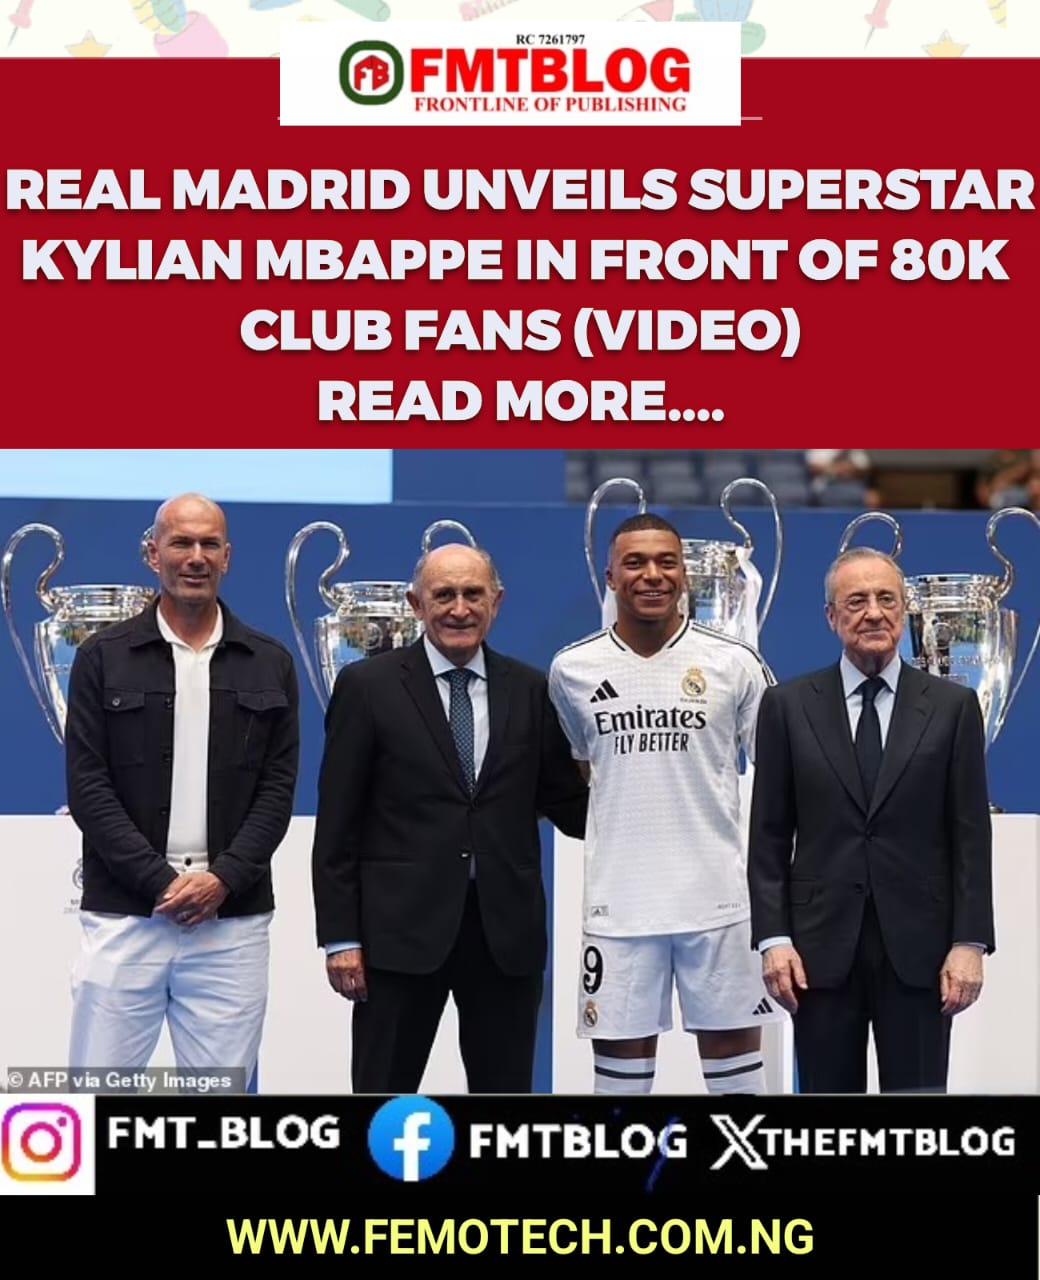 Real Madrid Unveils Superstar Kylian Mbappe In Front Of 80K Club Fans (VIDEO)